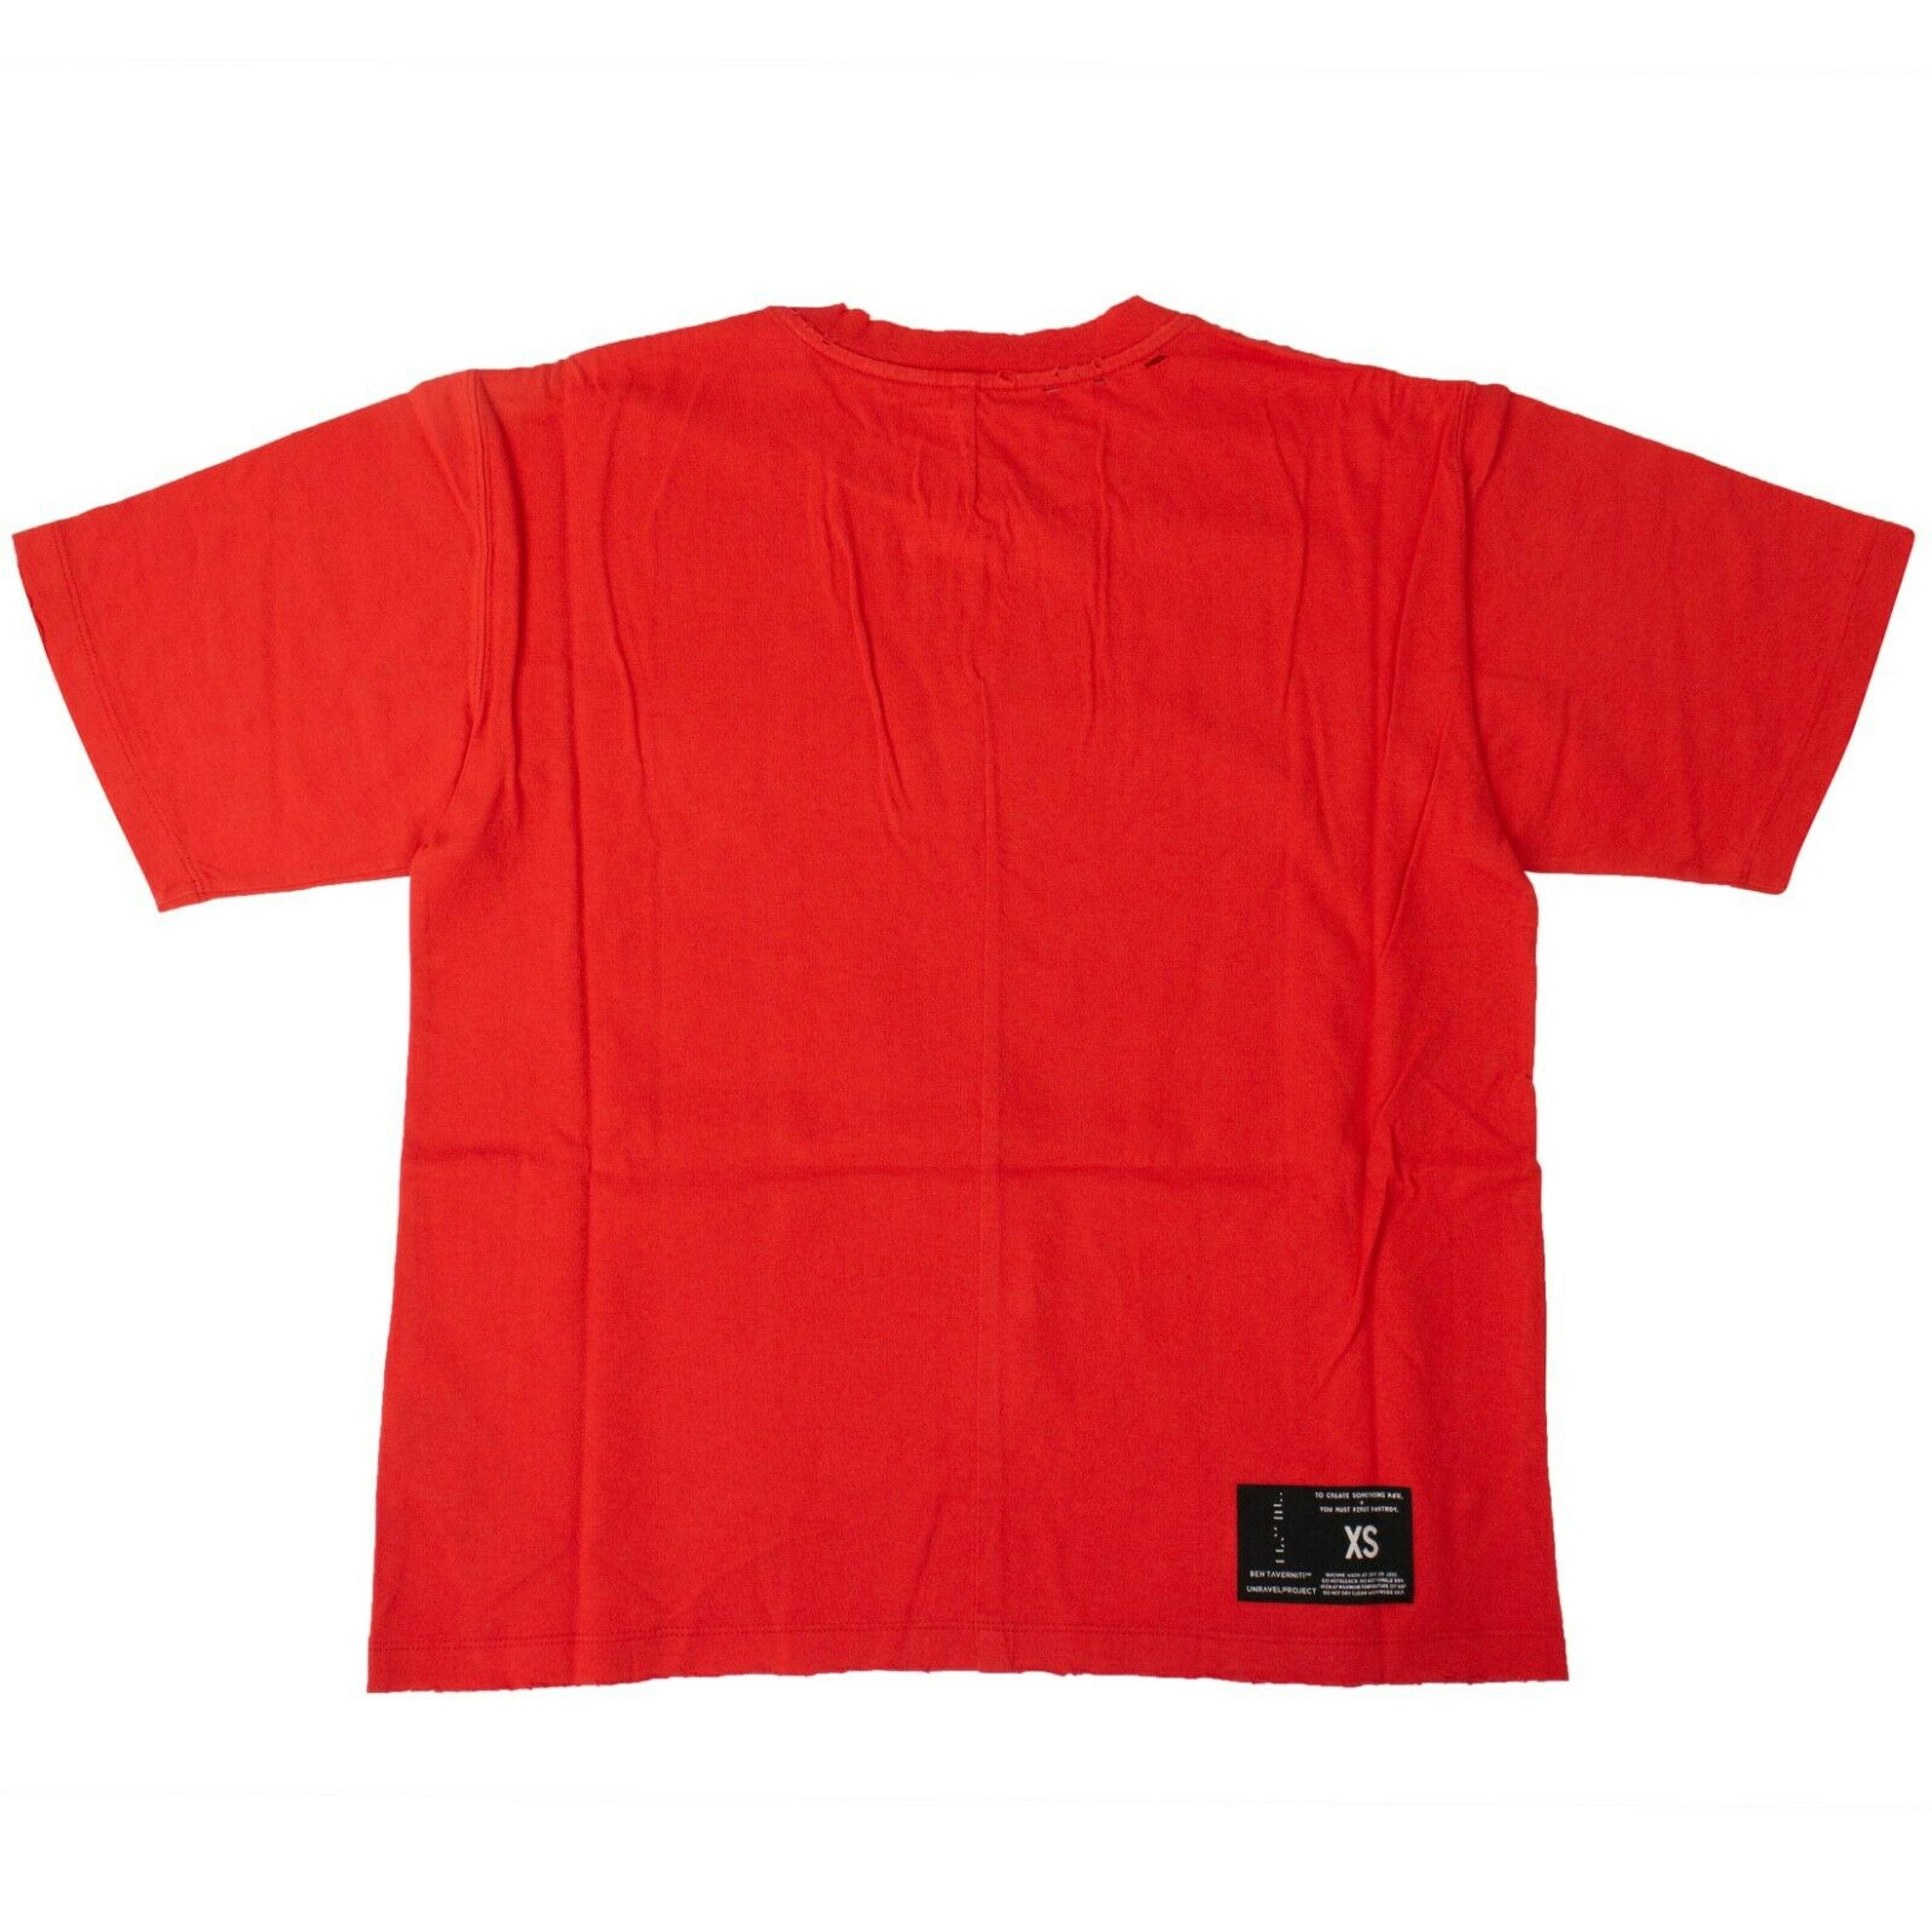 Alternate View 2 of Unravel Project Slogan Print T-Shirt - Red